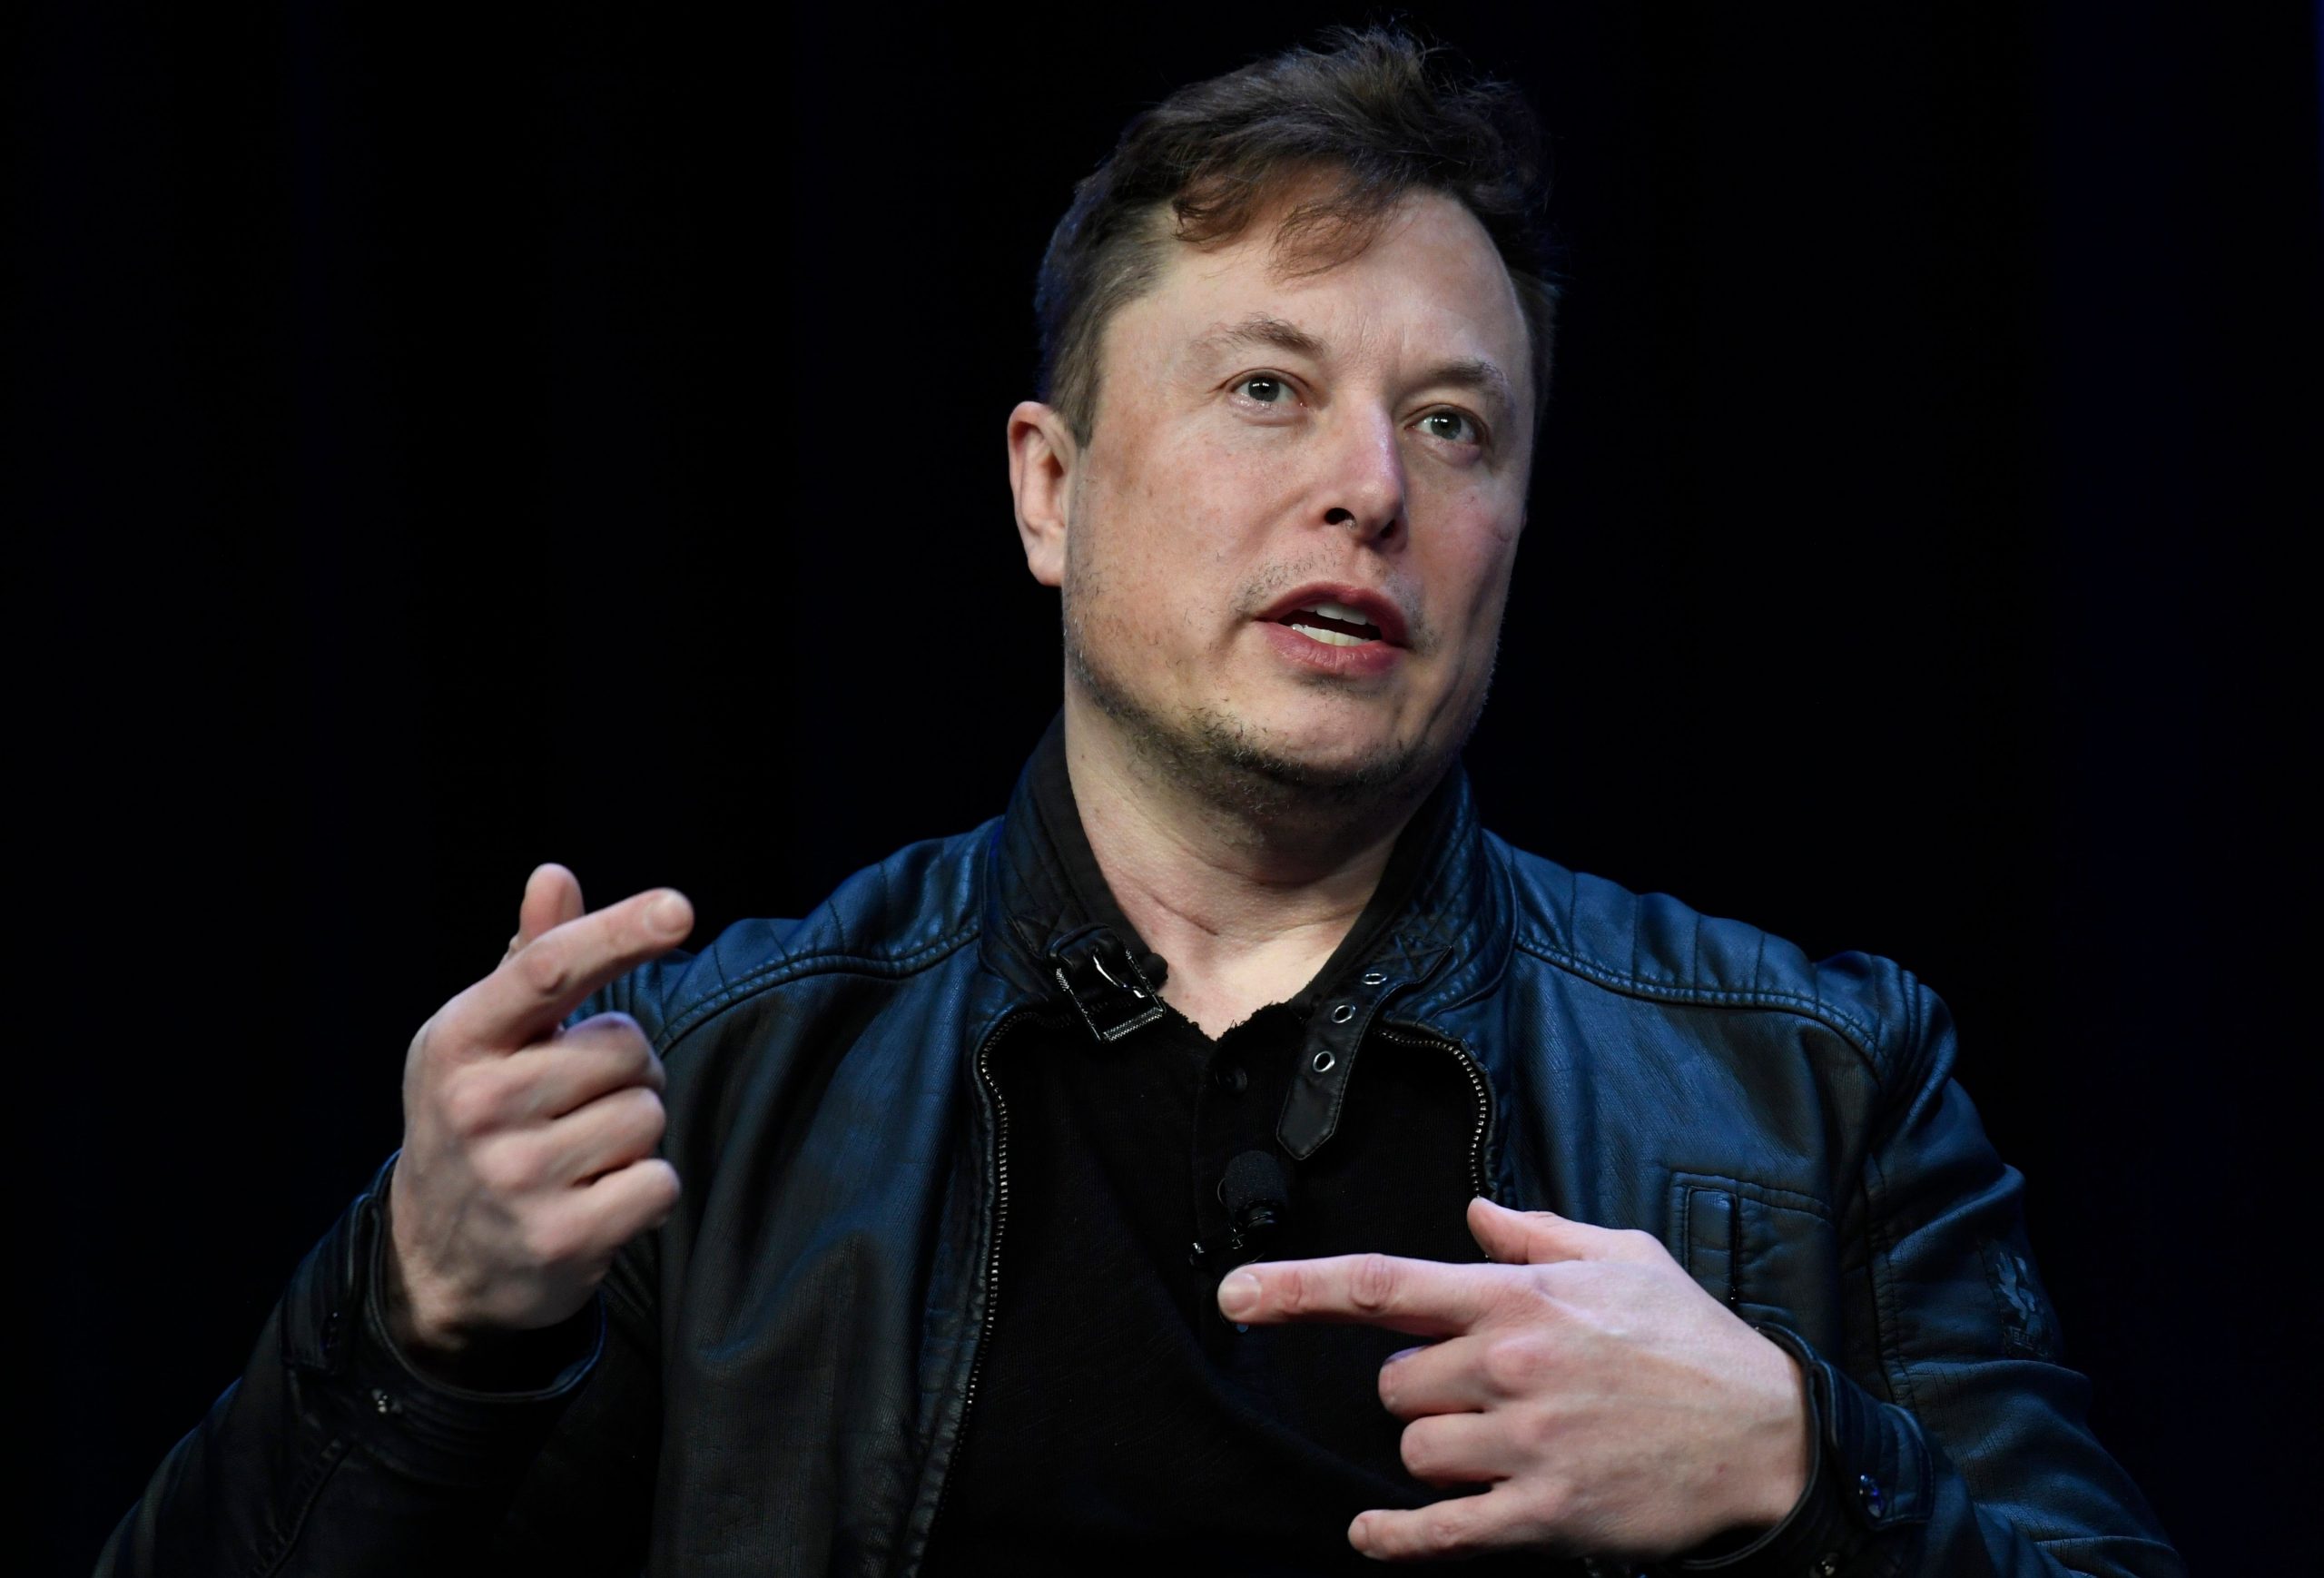 Twitter whistleblower or Tesla whistle? What’s behind Elon Musk’s new post